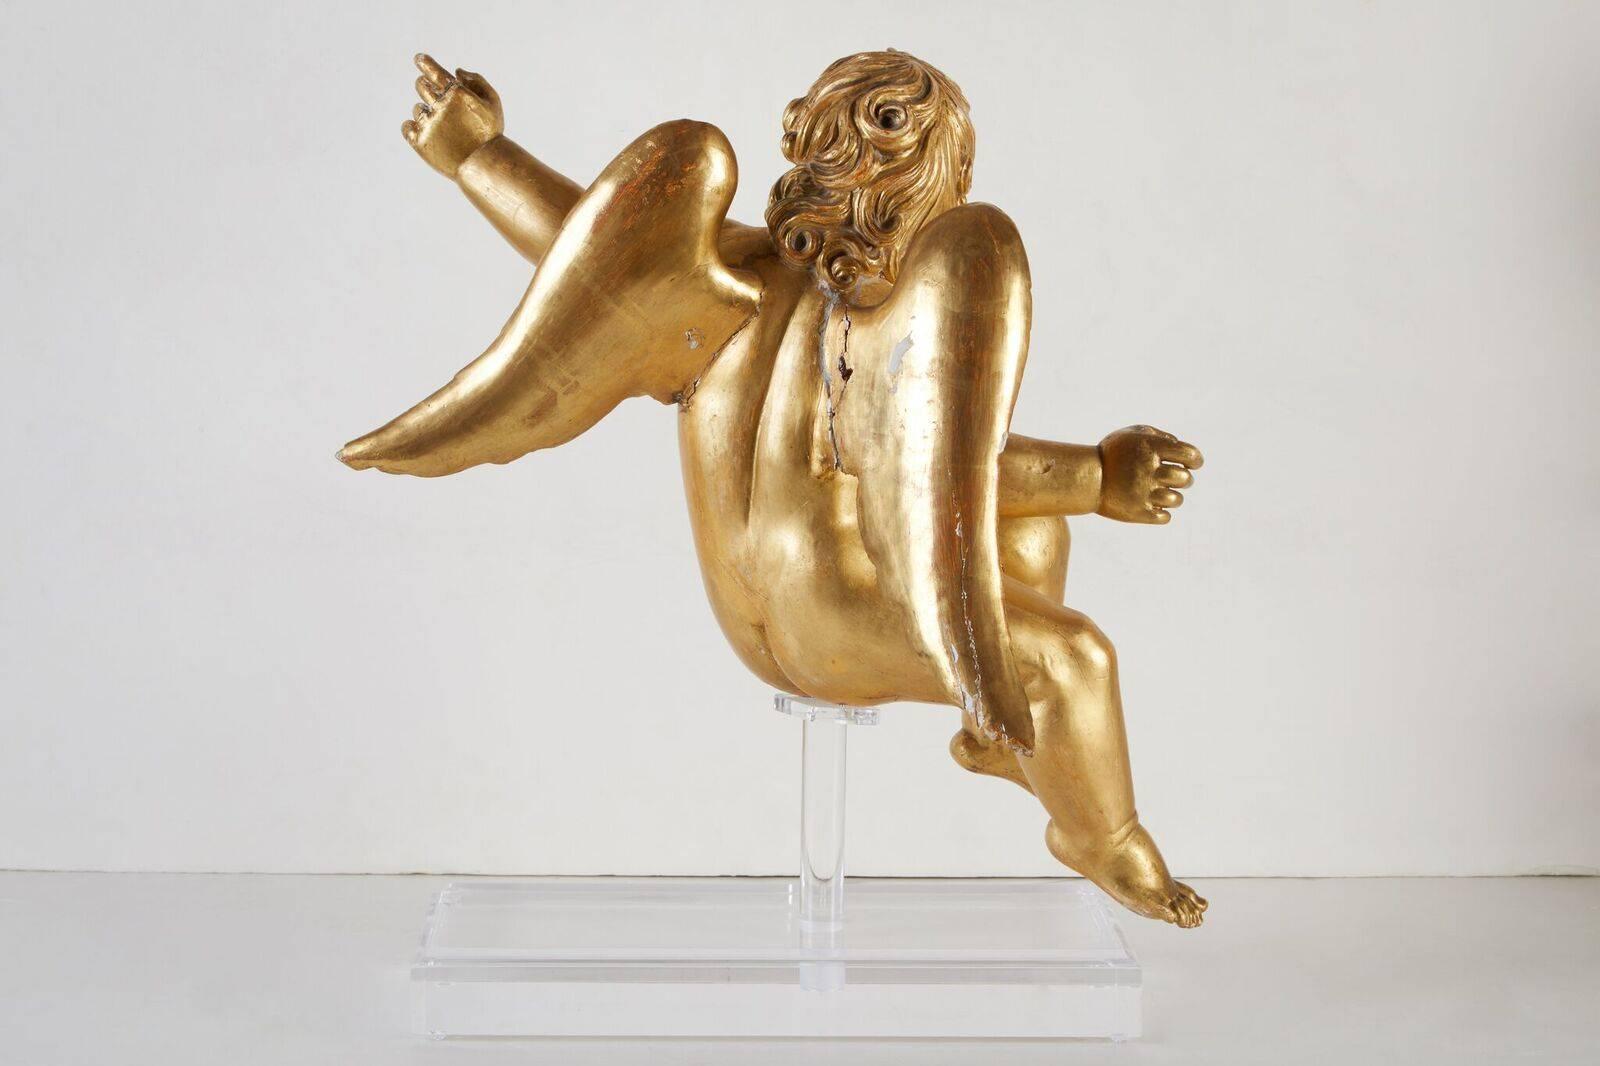 Rare, Early 19th Century, Gilded Presentational Cherubim - Brown Figurative Sculpture by Unknown